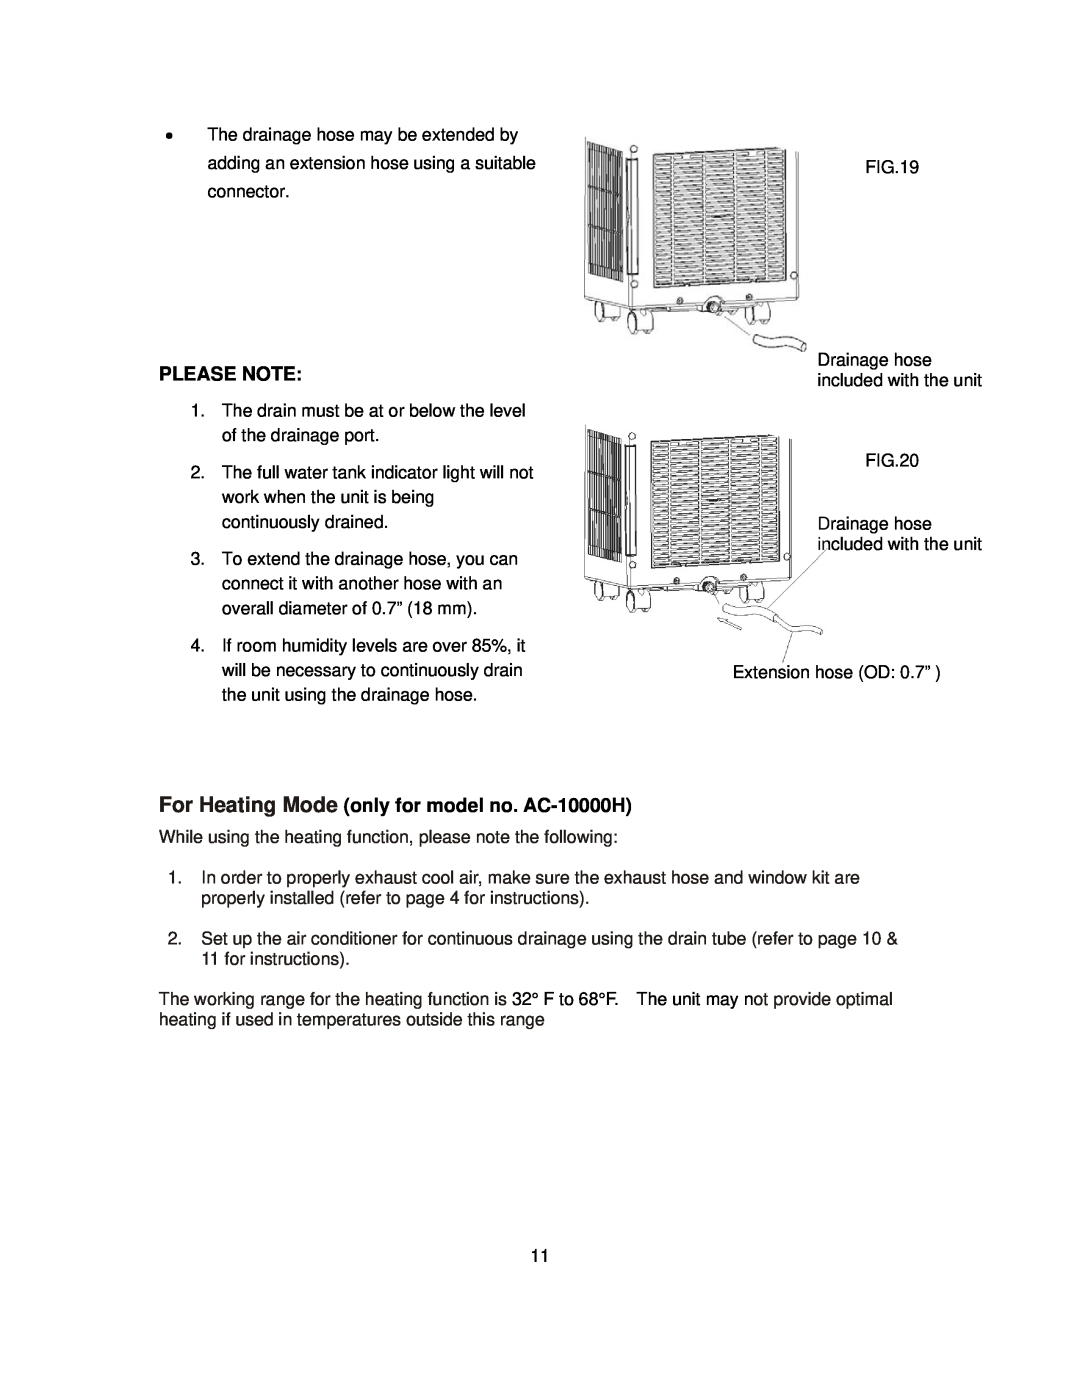 NewAir AC-10000E owner manual Please Note, For Heating Mode only for model no. AC-10000H 